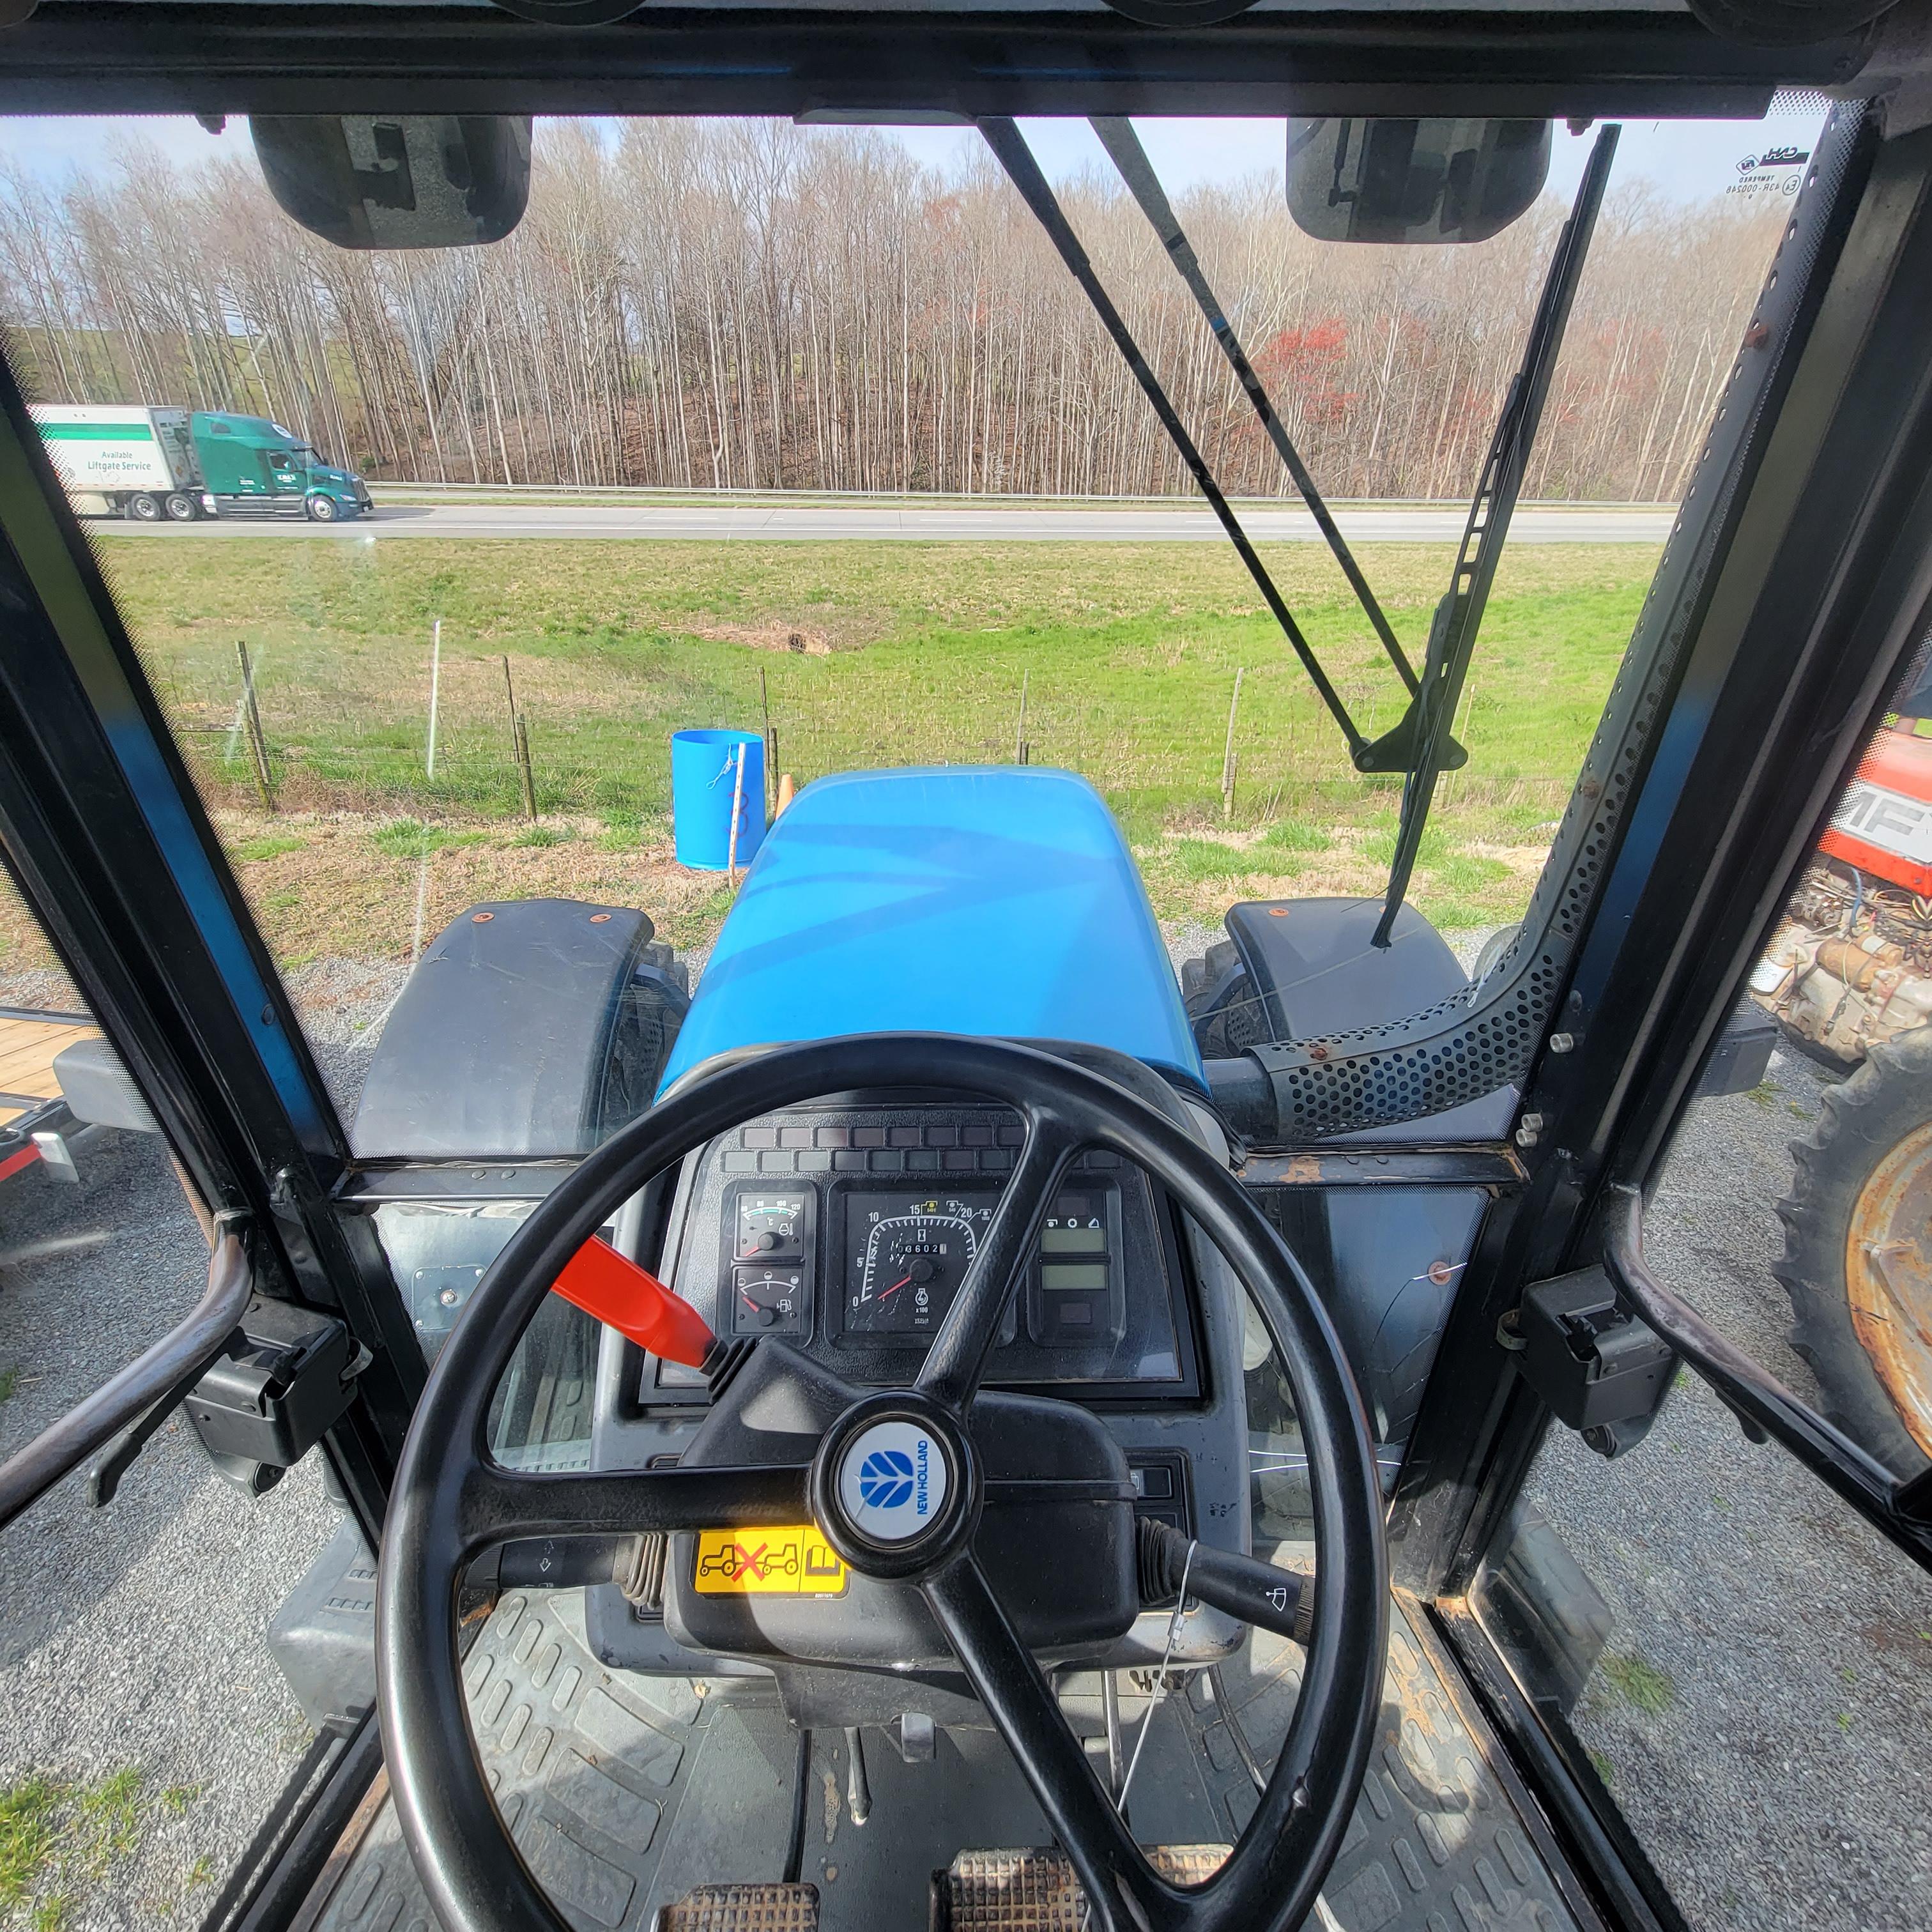 NEW HOLLAND 8360 TRACTOR 3601 HOURS